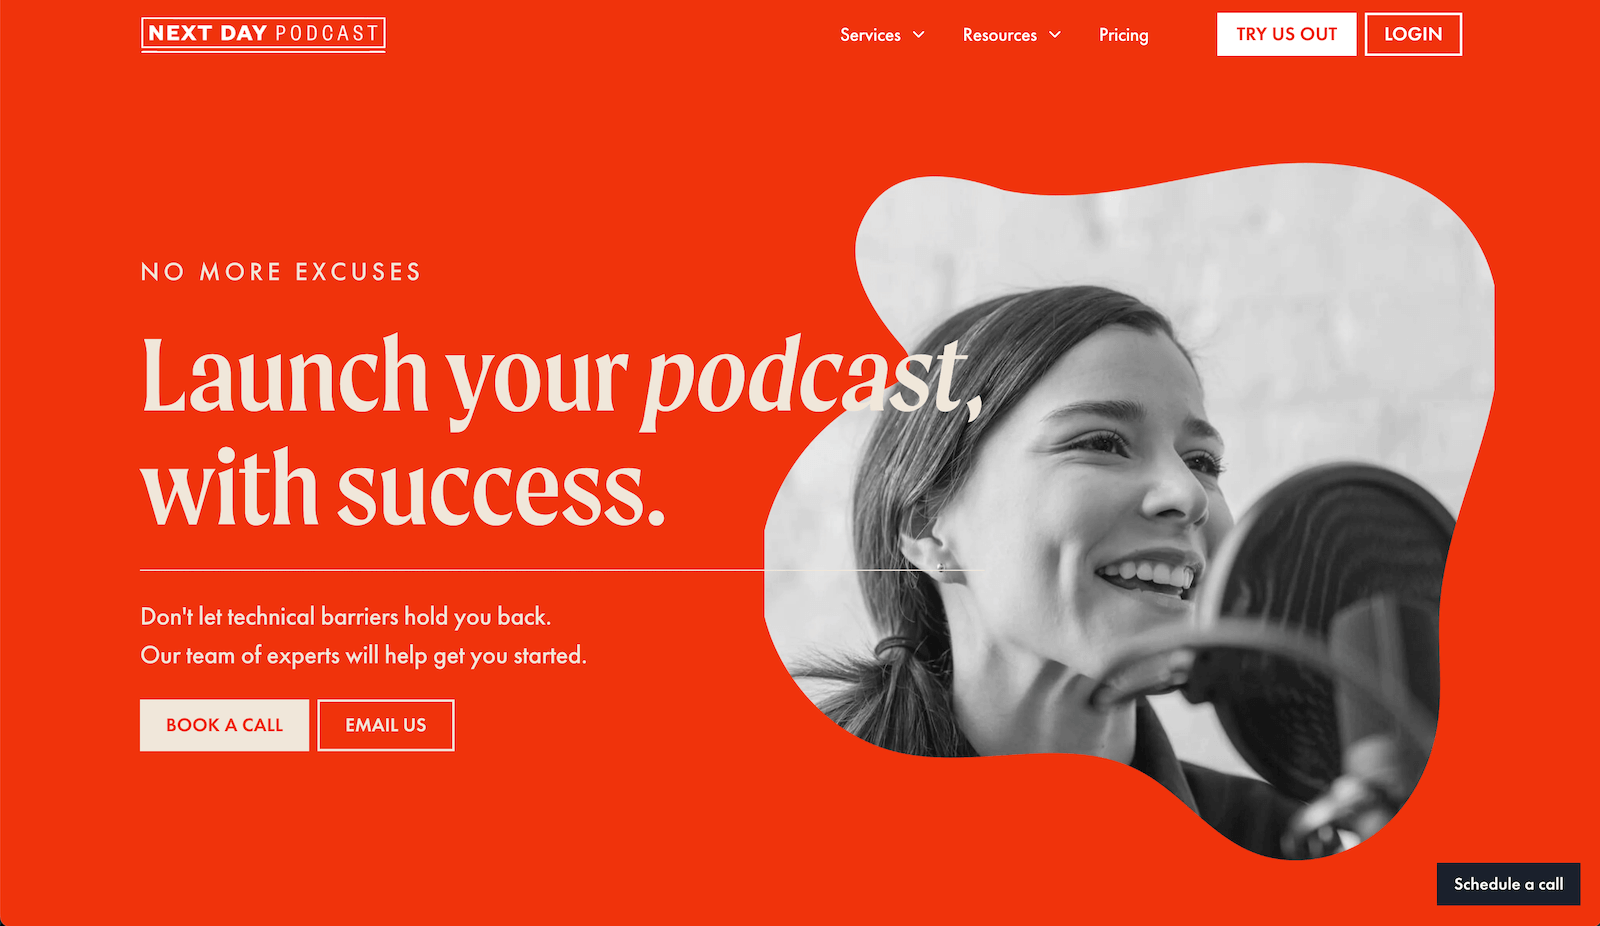 Next Day Podcast - Podcast launch service